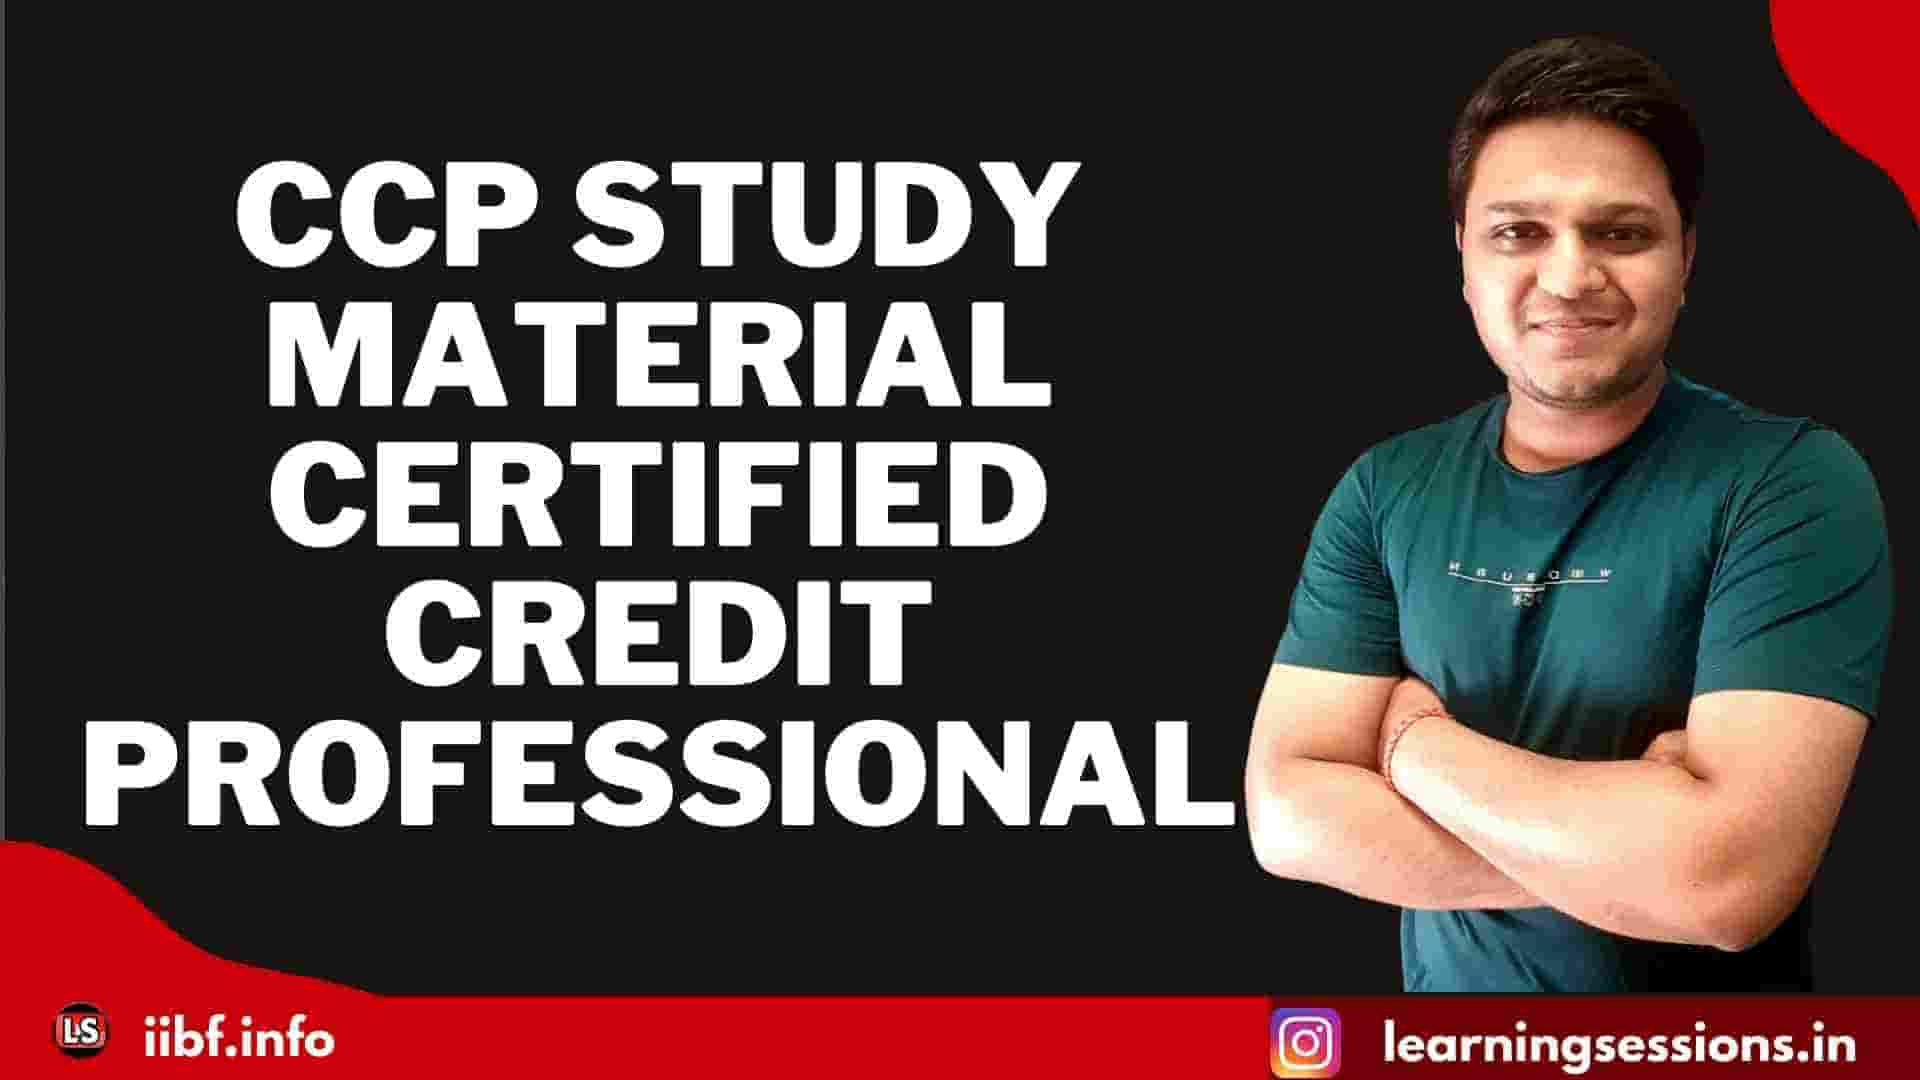 CCP STUDY MATERIAL - CERTIFIED CREDIT PROFESSIONAL 2022